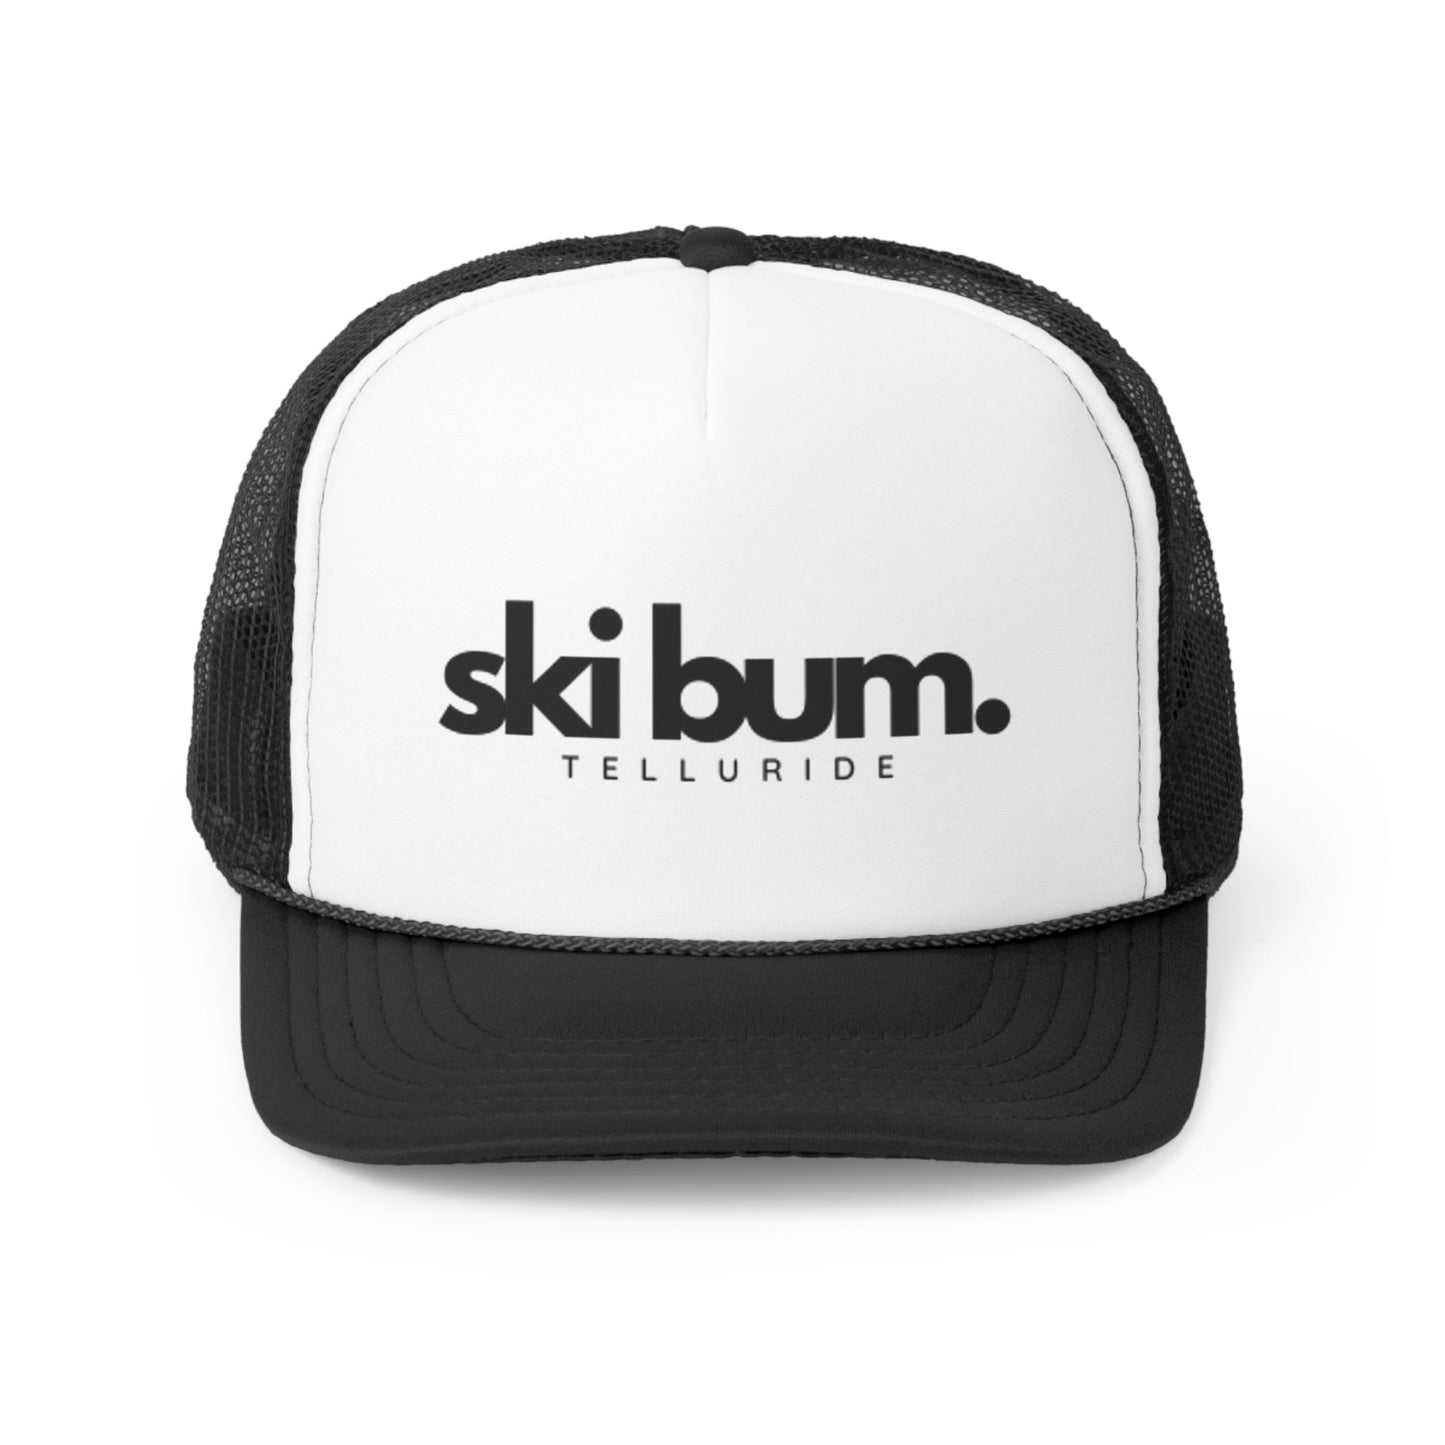 Black trucker hat with white label featuring black lettering saying "Ski Bum" and Telluride. The hat is perfect to keep the sun out of your face while you're skiing or snowboarding. The phrase "Ski Bum" is a popular term for someone who loves to ski or snowboard and who lives or spends a lot of time in a ski resort town. This hat is a great way to show your love of skiing and snowboarding, and your love of the Telluride Ski Resort. 